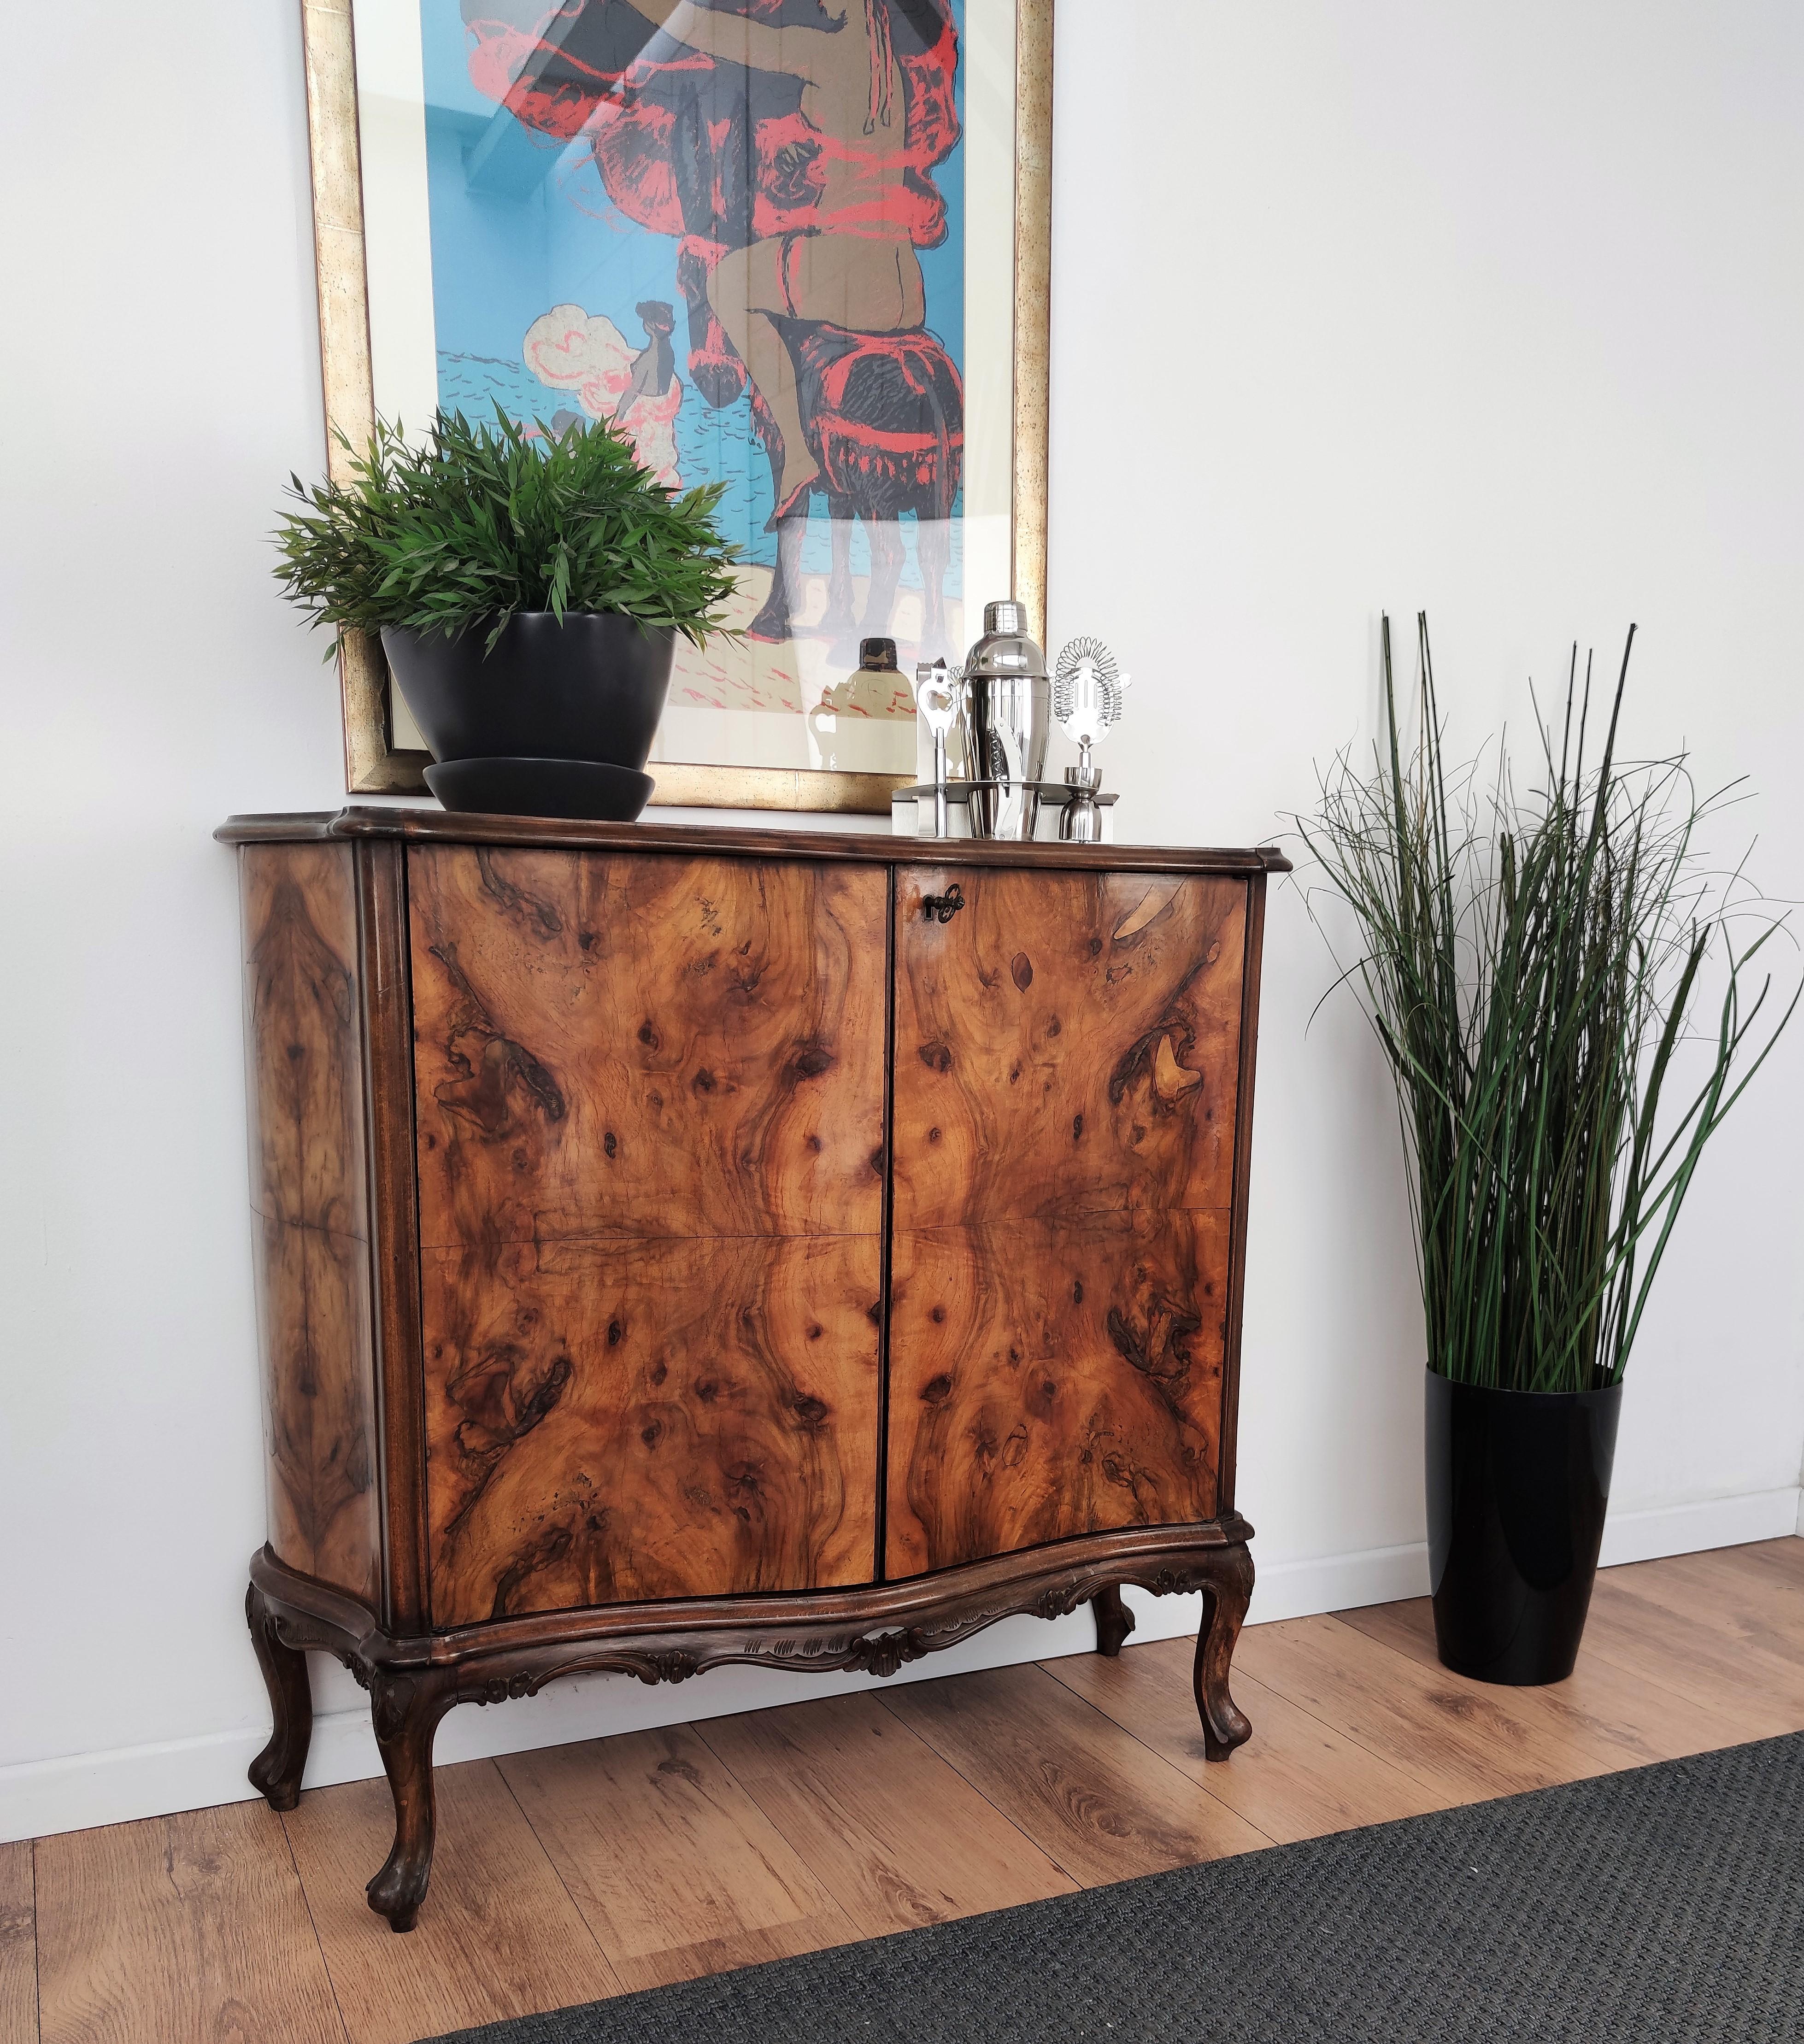 Beautifully and very elegantly shaped Italian Art Deco Mid-Century Modern dry bar cabinet, in great veneer walnut briar burl wood, double front doors and an amazing interior part in mirrors mosaic with a glass shelf and bottom red lacquered glass.